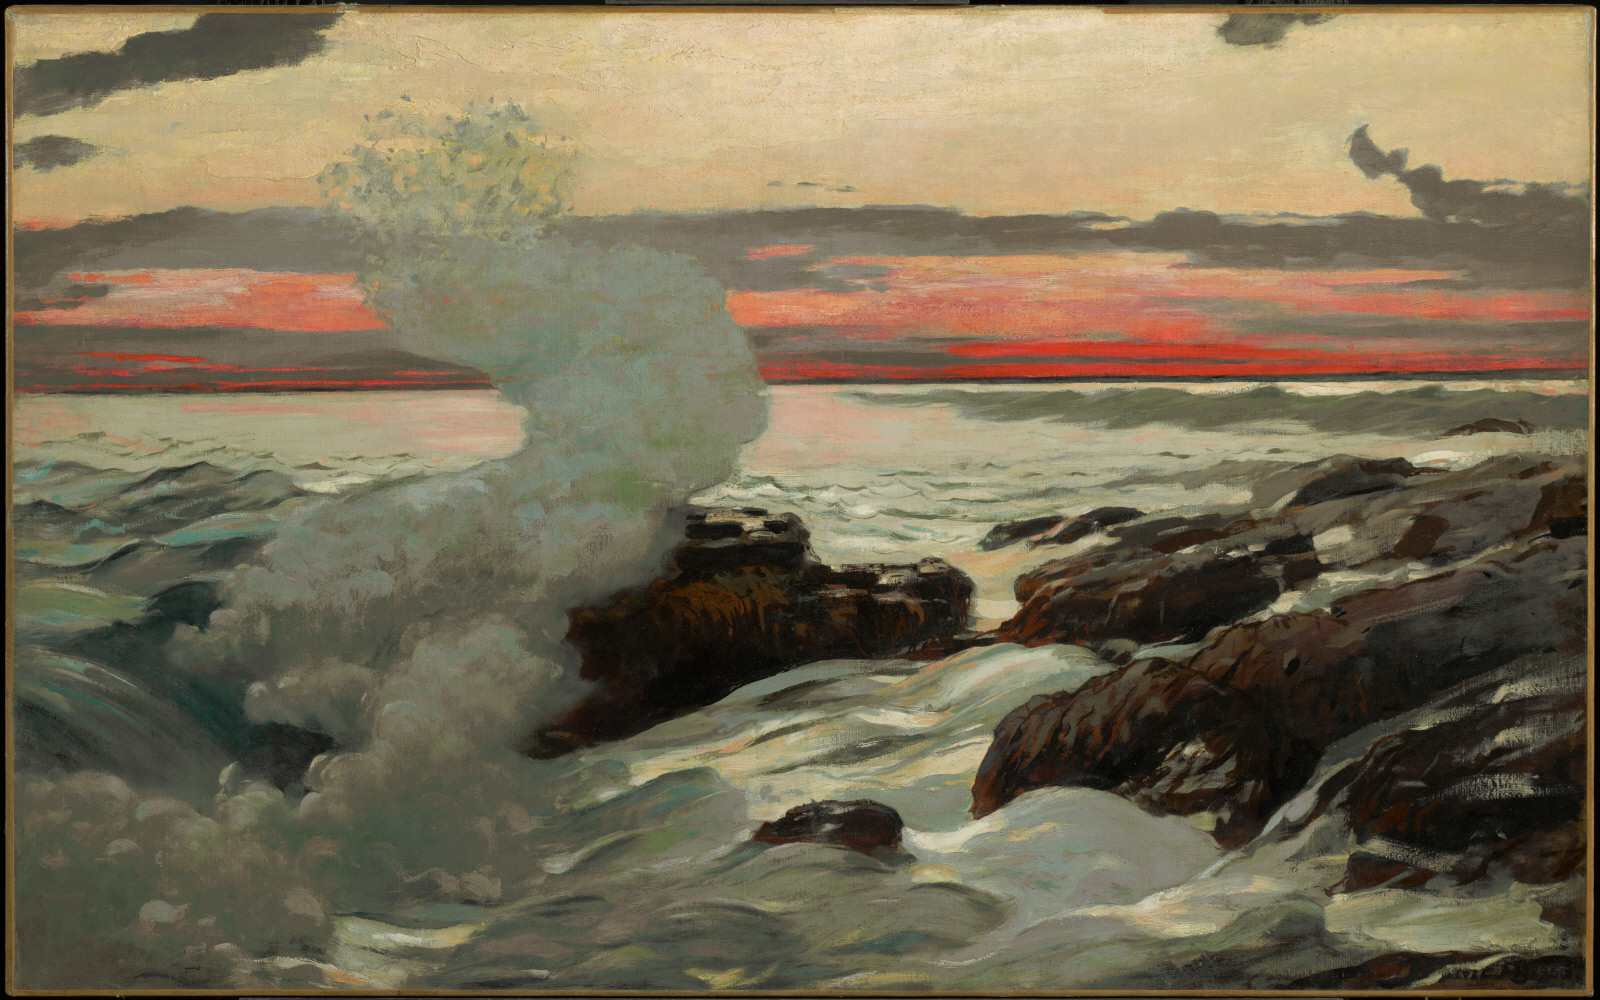 Winslow Homer, WEST POINT, PROUT'S NECK. Image courtesy Clark Art Institute. clarkart.edu A painting of a spray of seawater splashing up from a rocky shore.